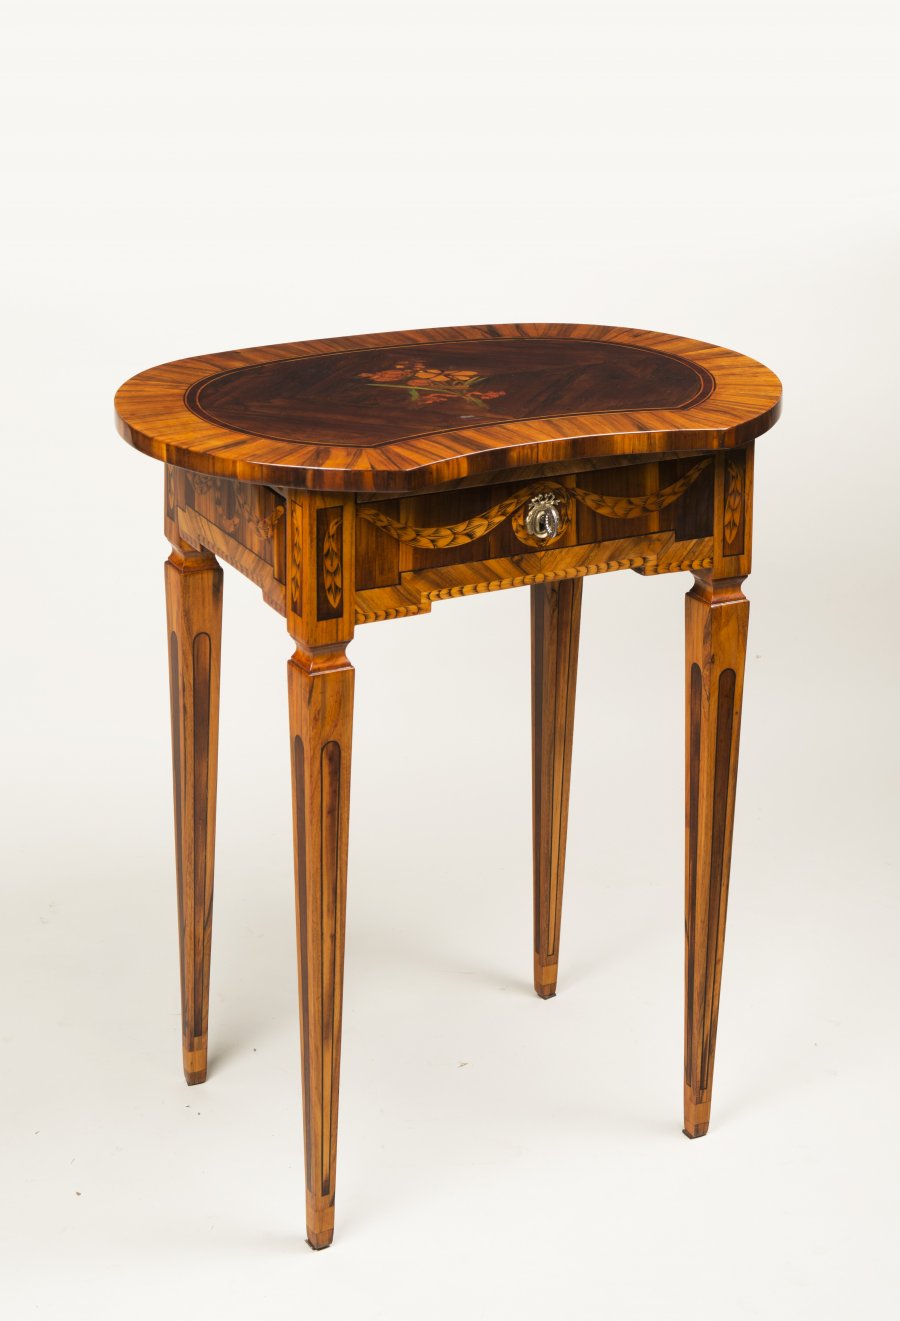 A NEOCLASSICAL SIDE TABLE